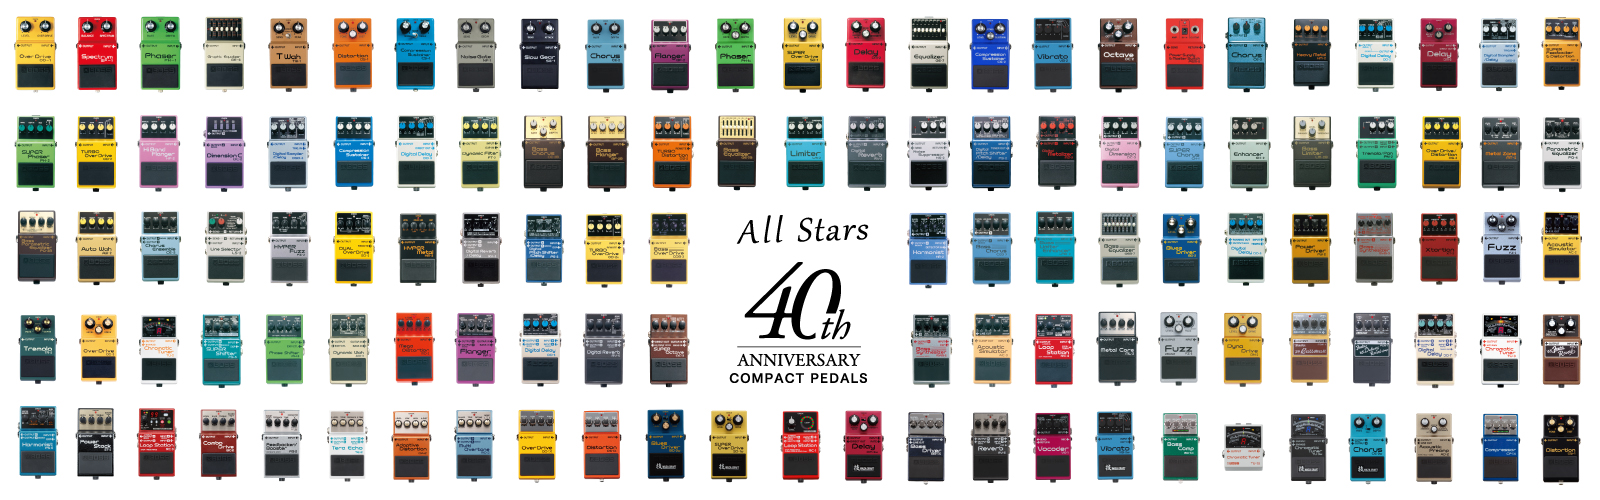 All Stars 40th ANNIVERSARY COMPACT PEDALS